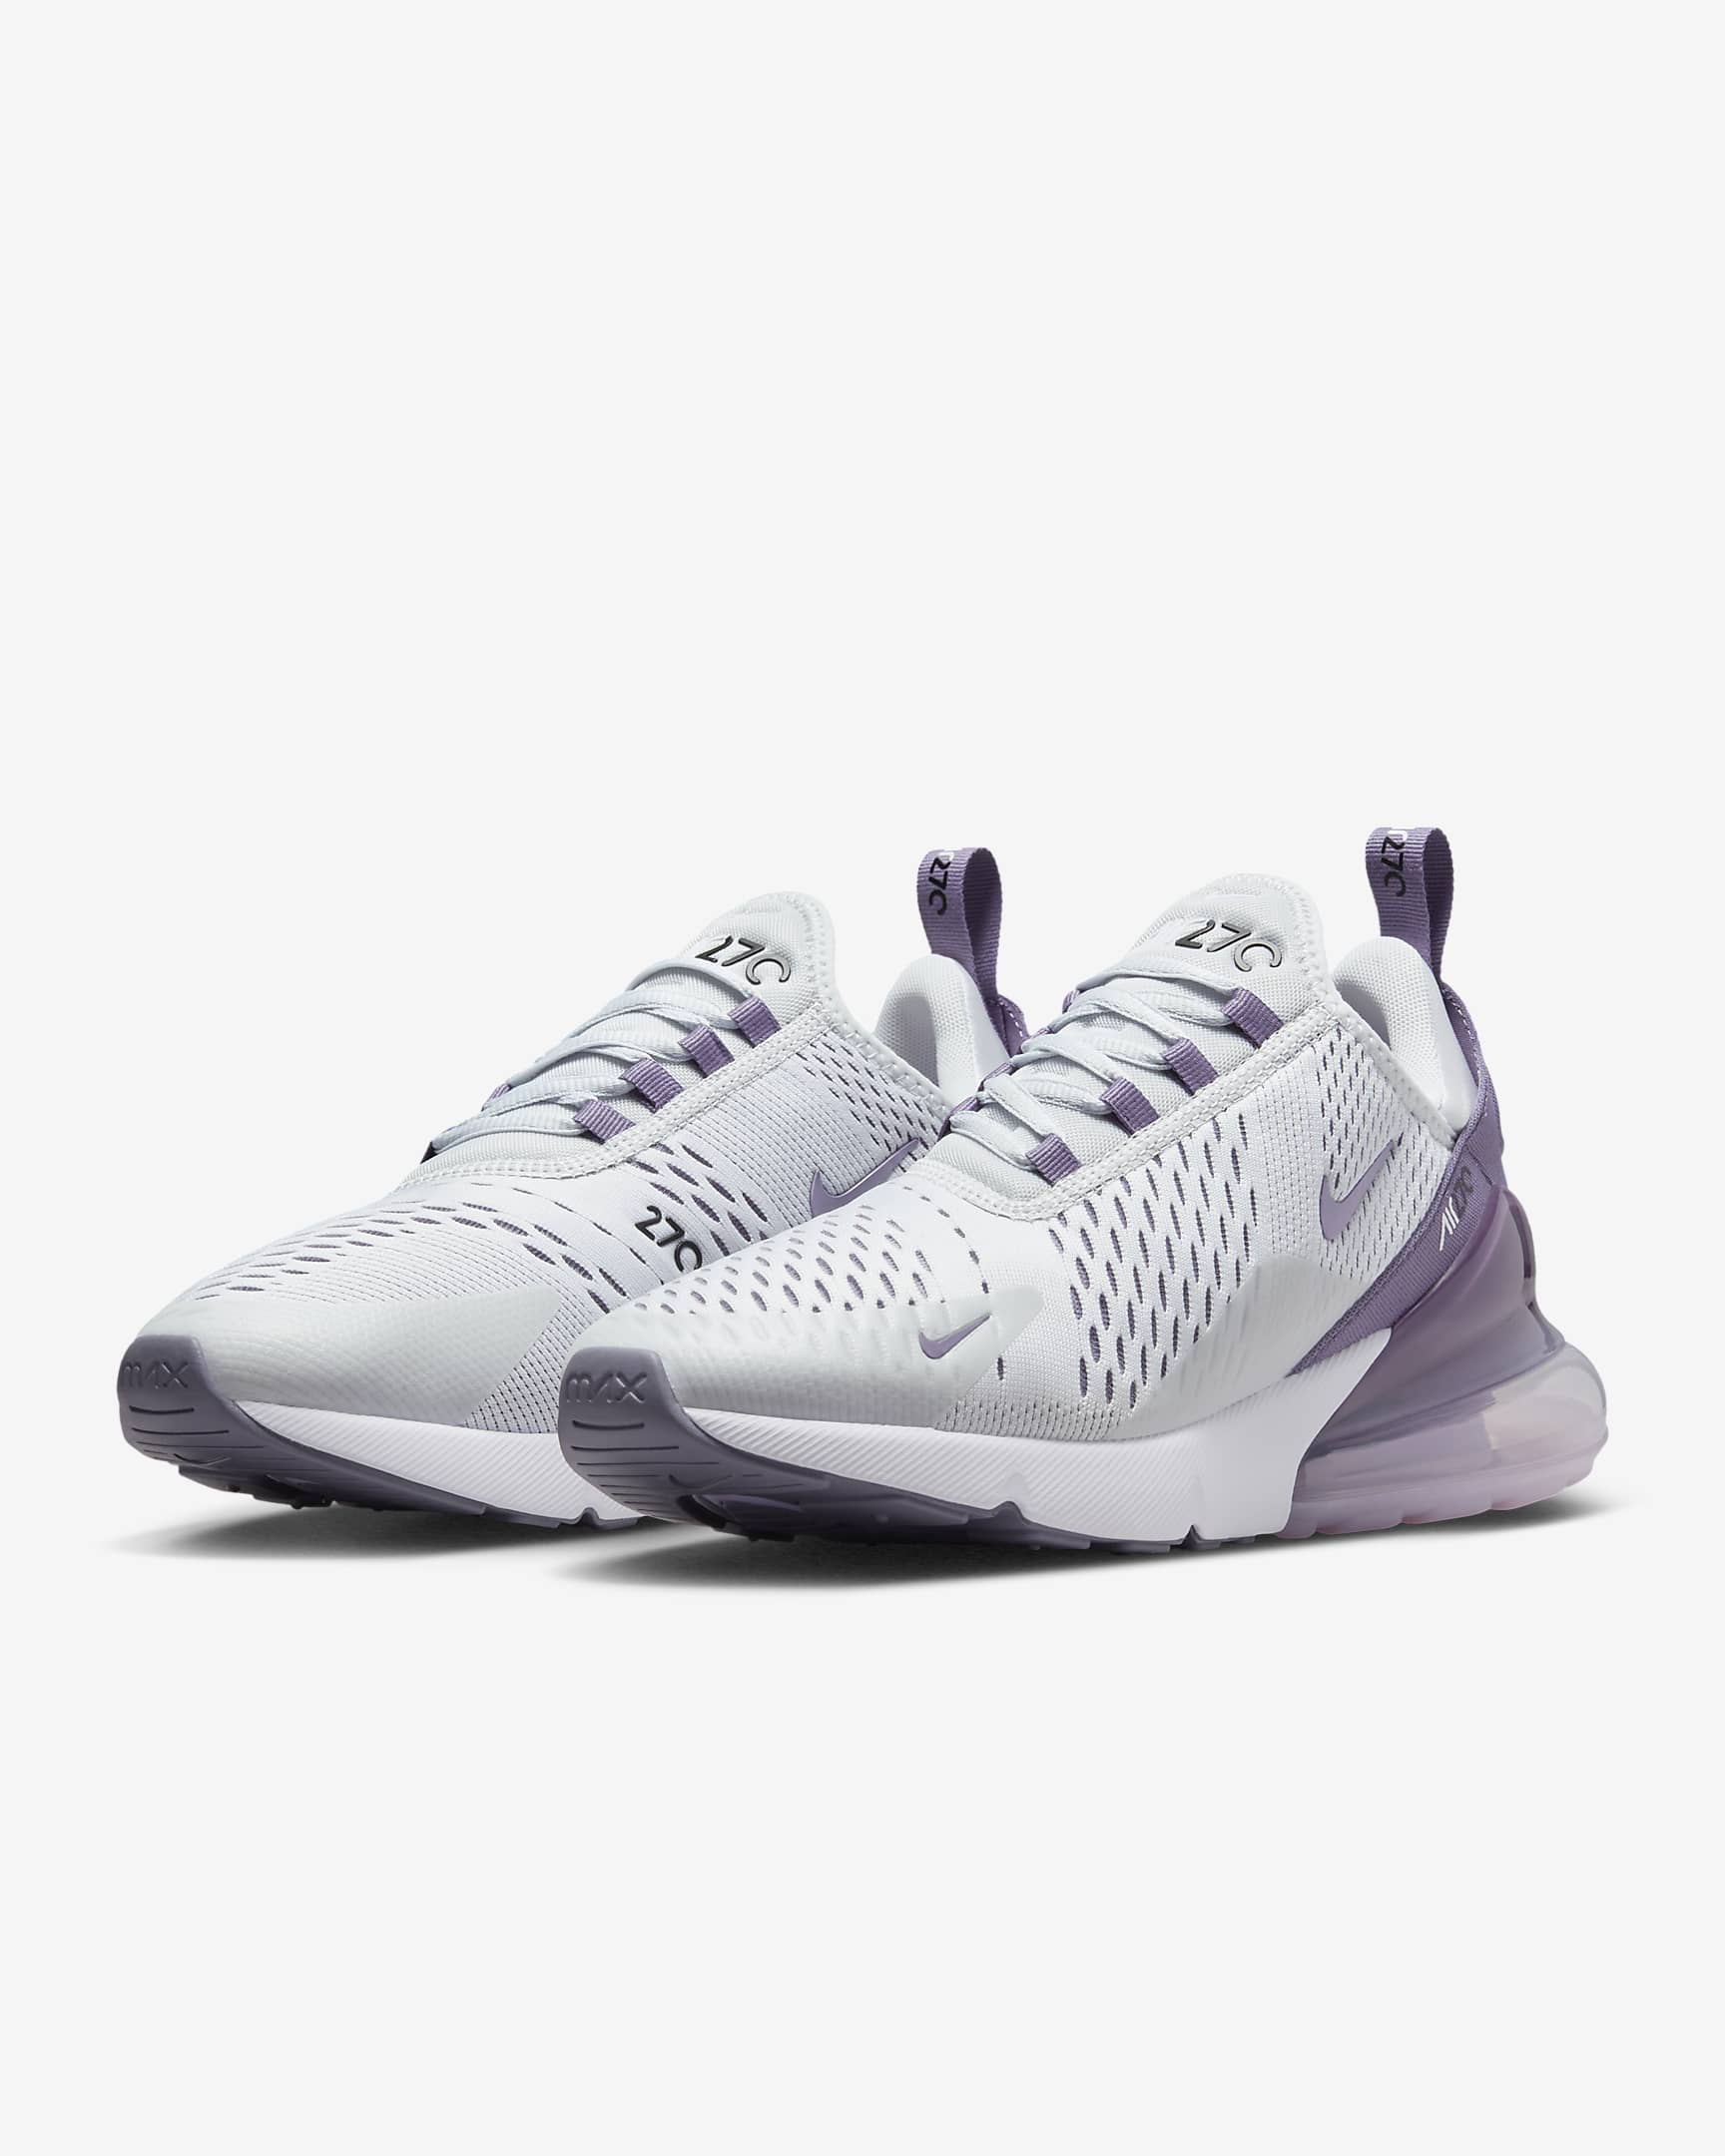 Nike Air Max 270 Women's Shoes - Pure Platinum/White/Lilac Bloom/Daybreak